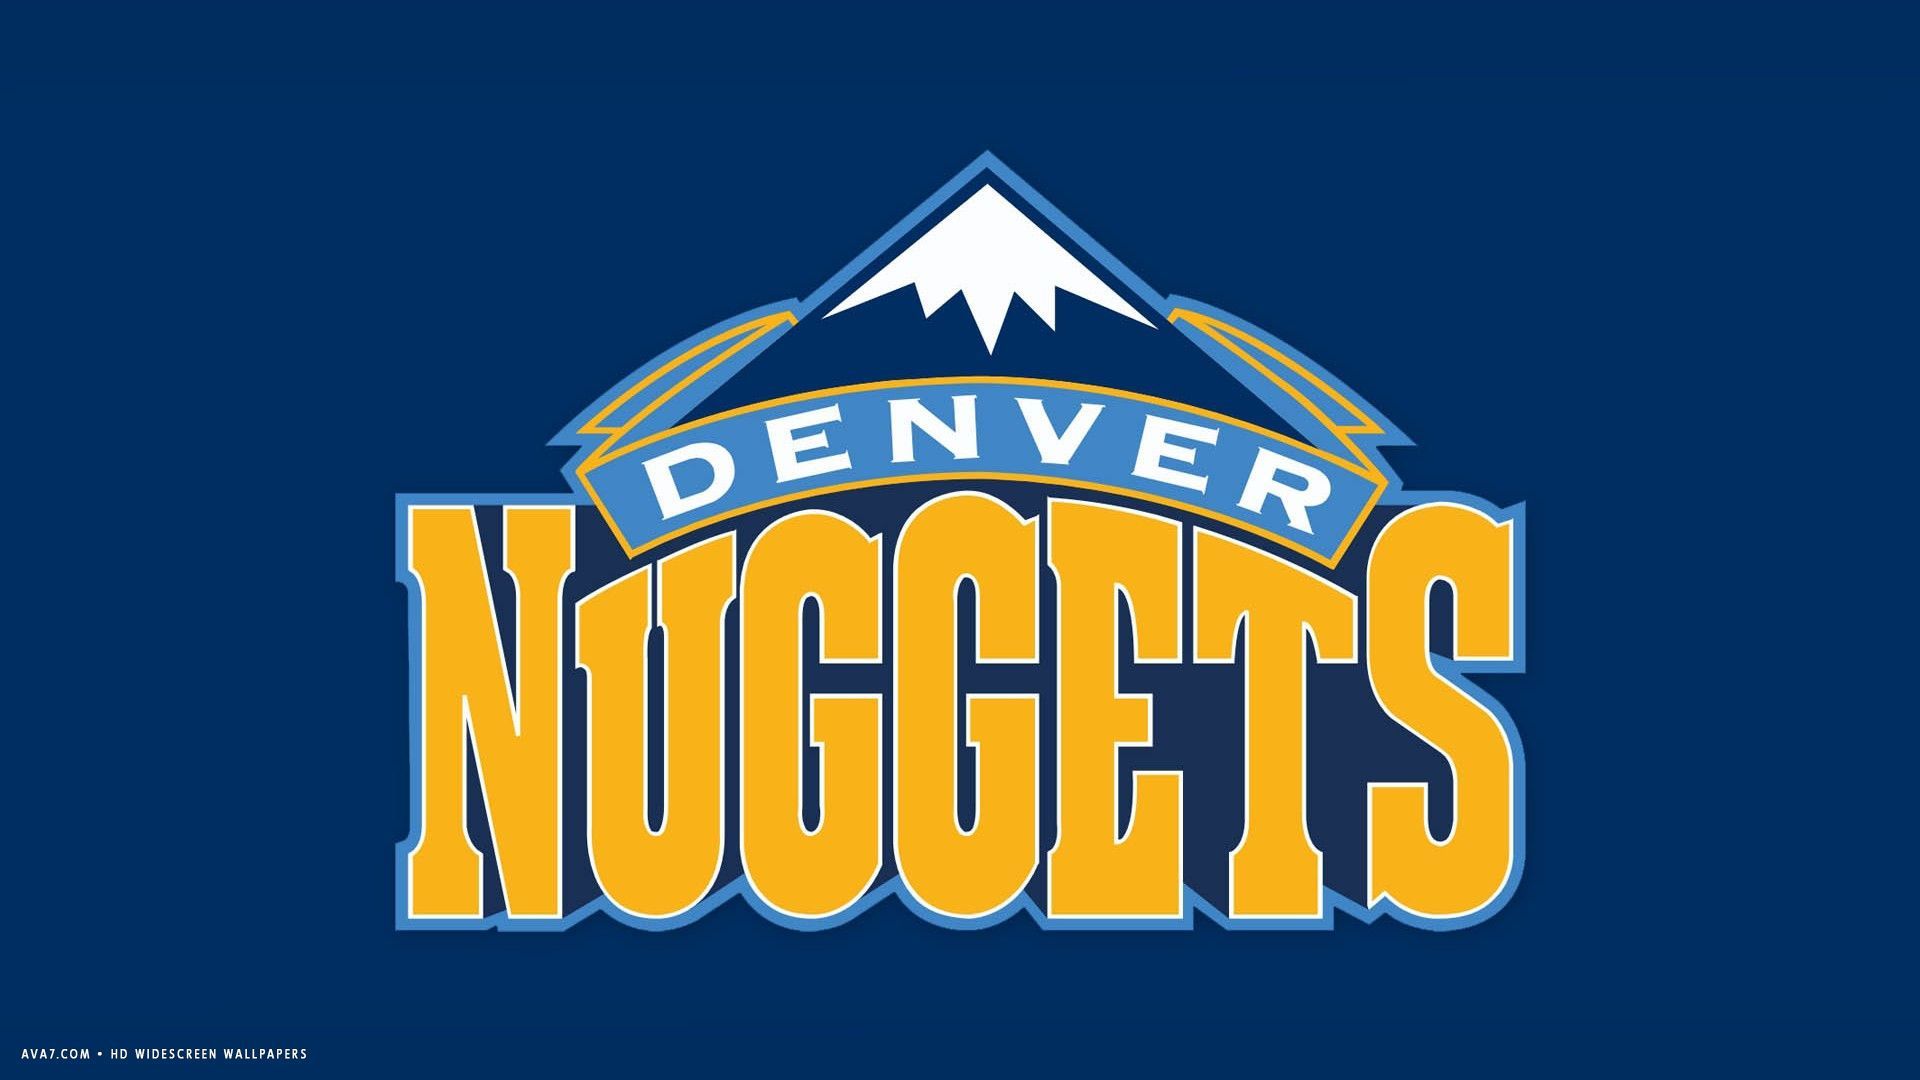 nuggets tickets